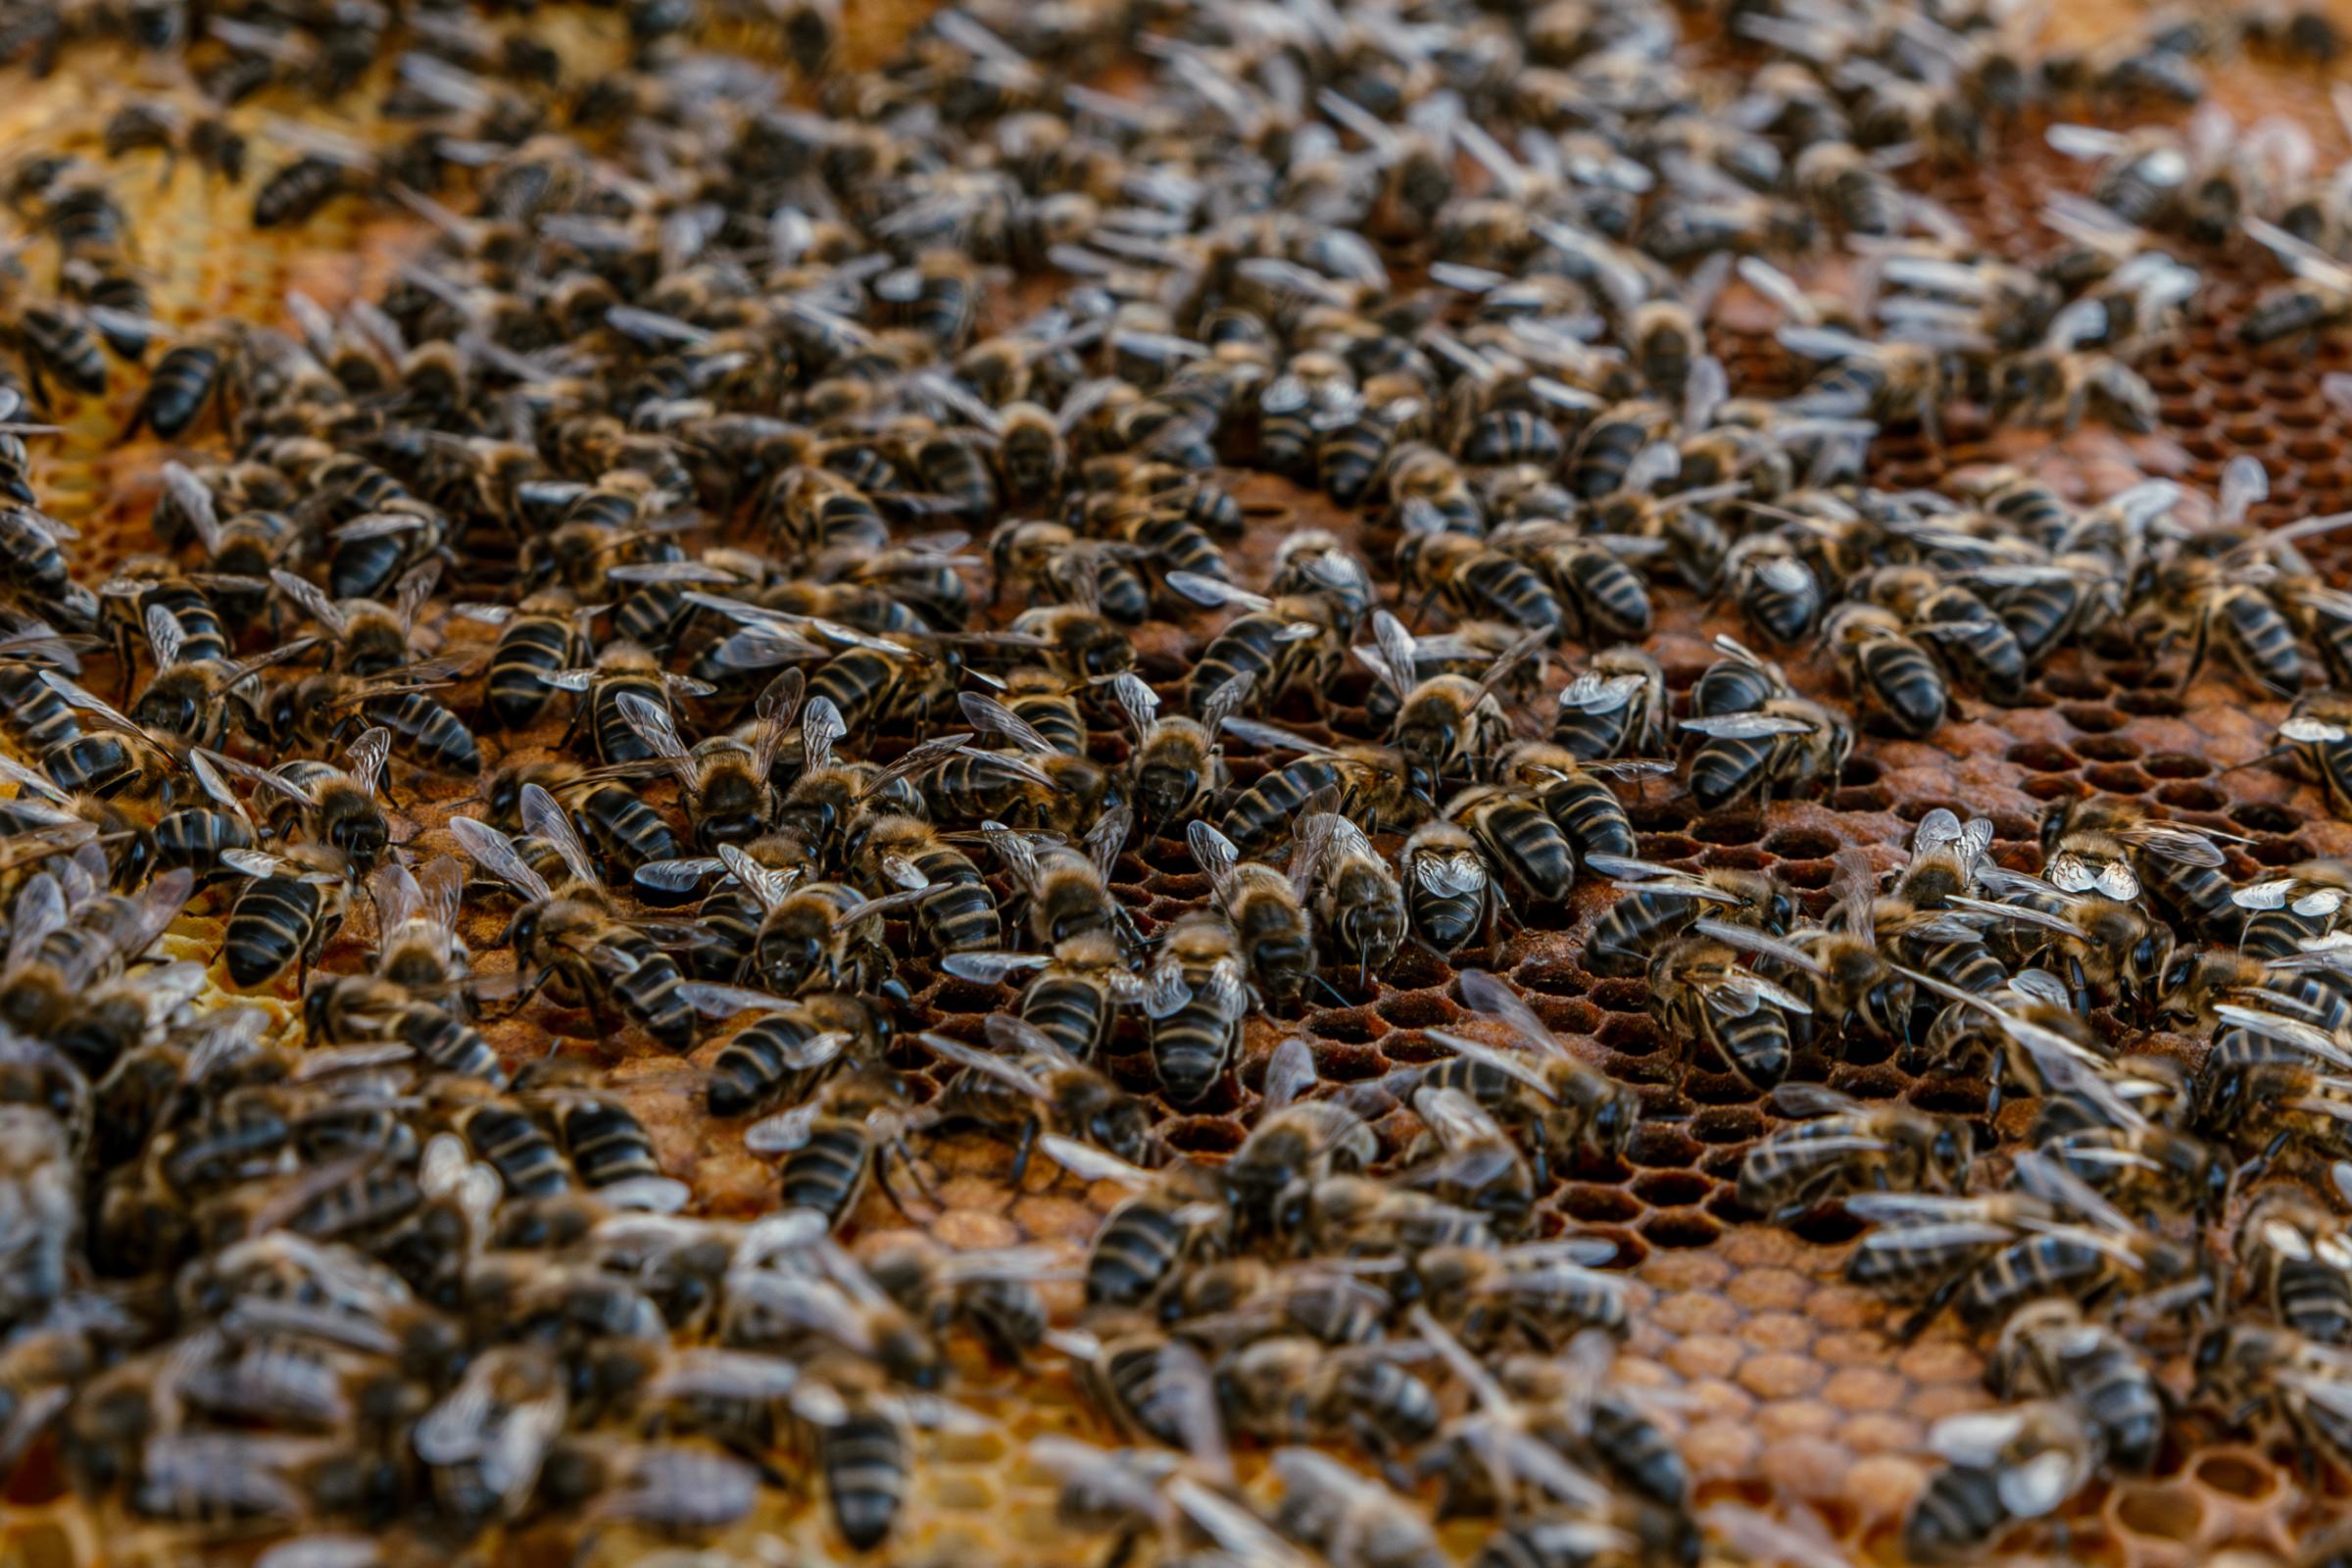 Portuguese Bee. - The bees from the region of Algarve are the most...